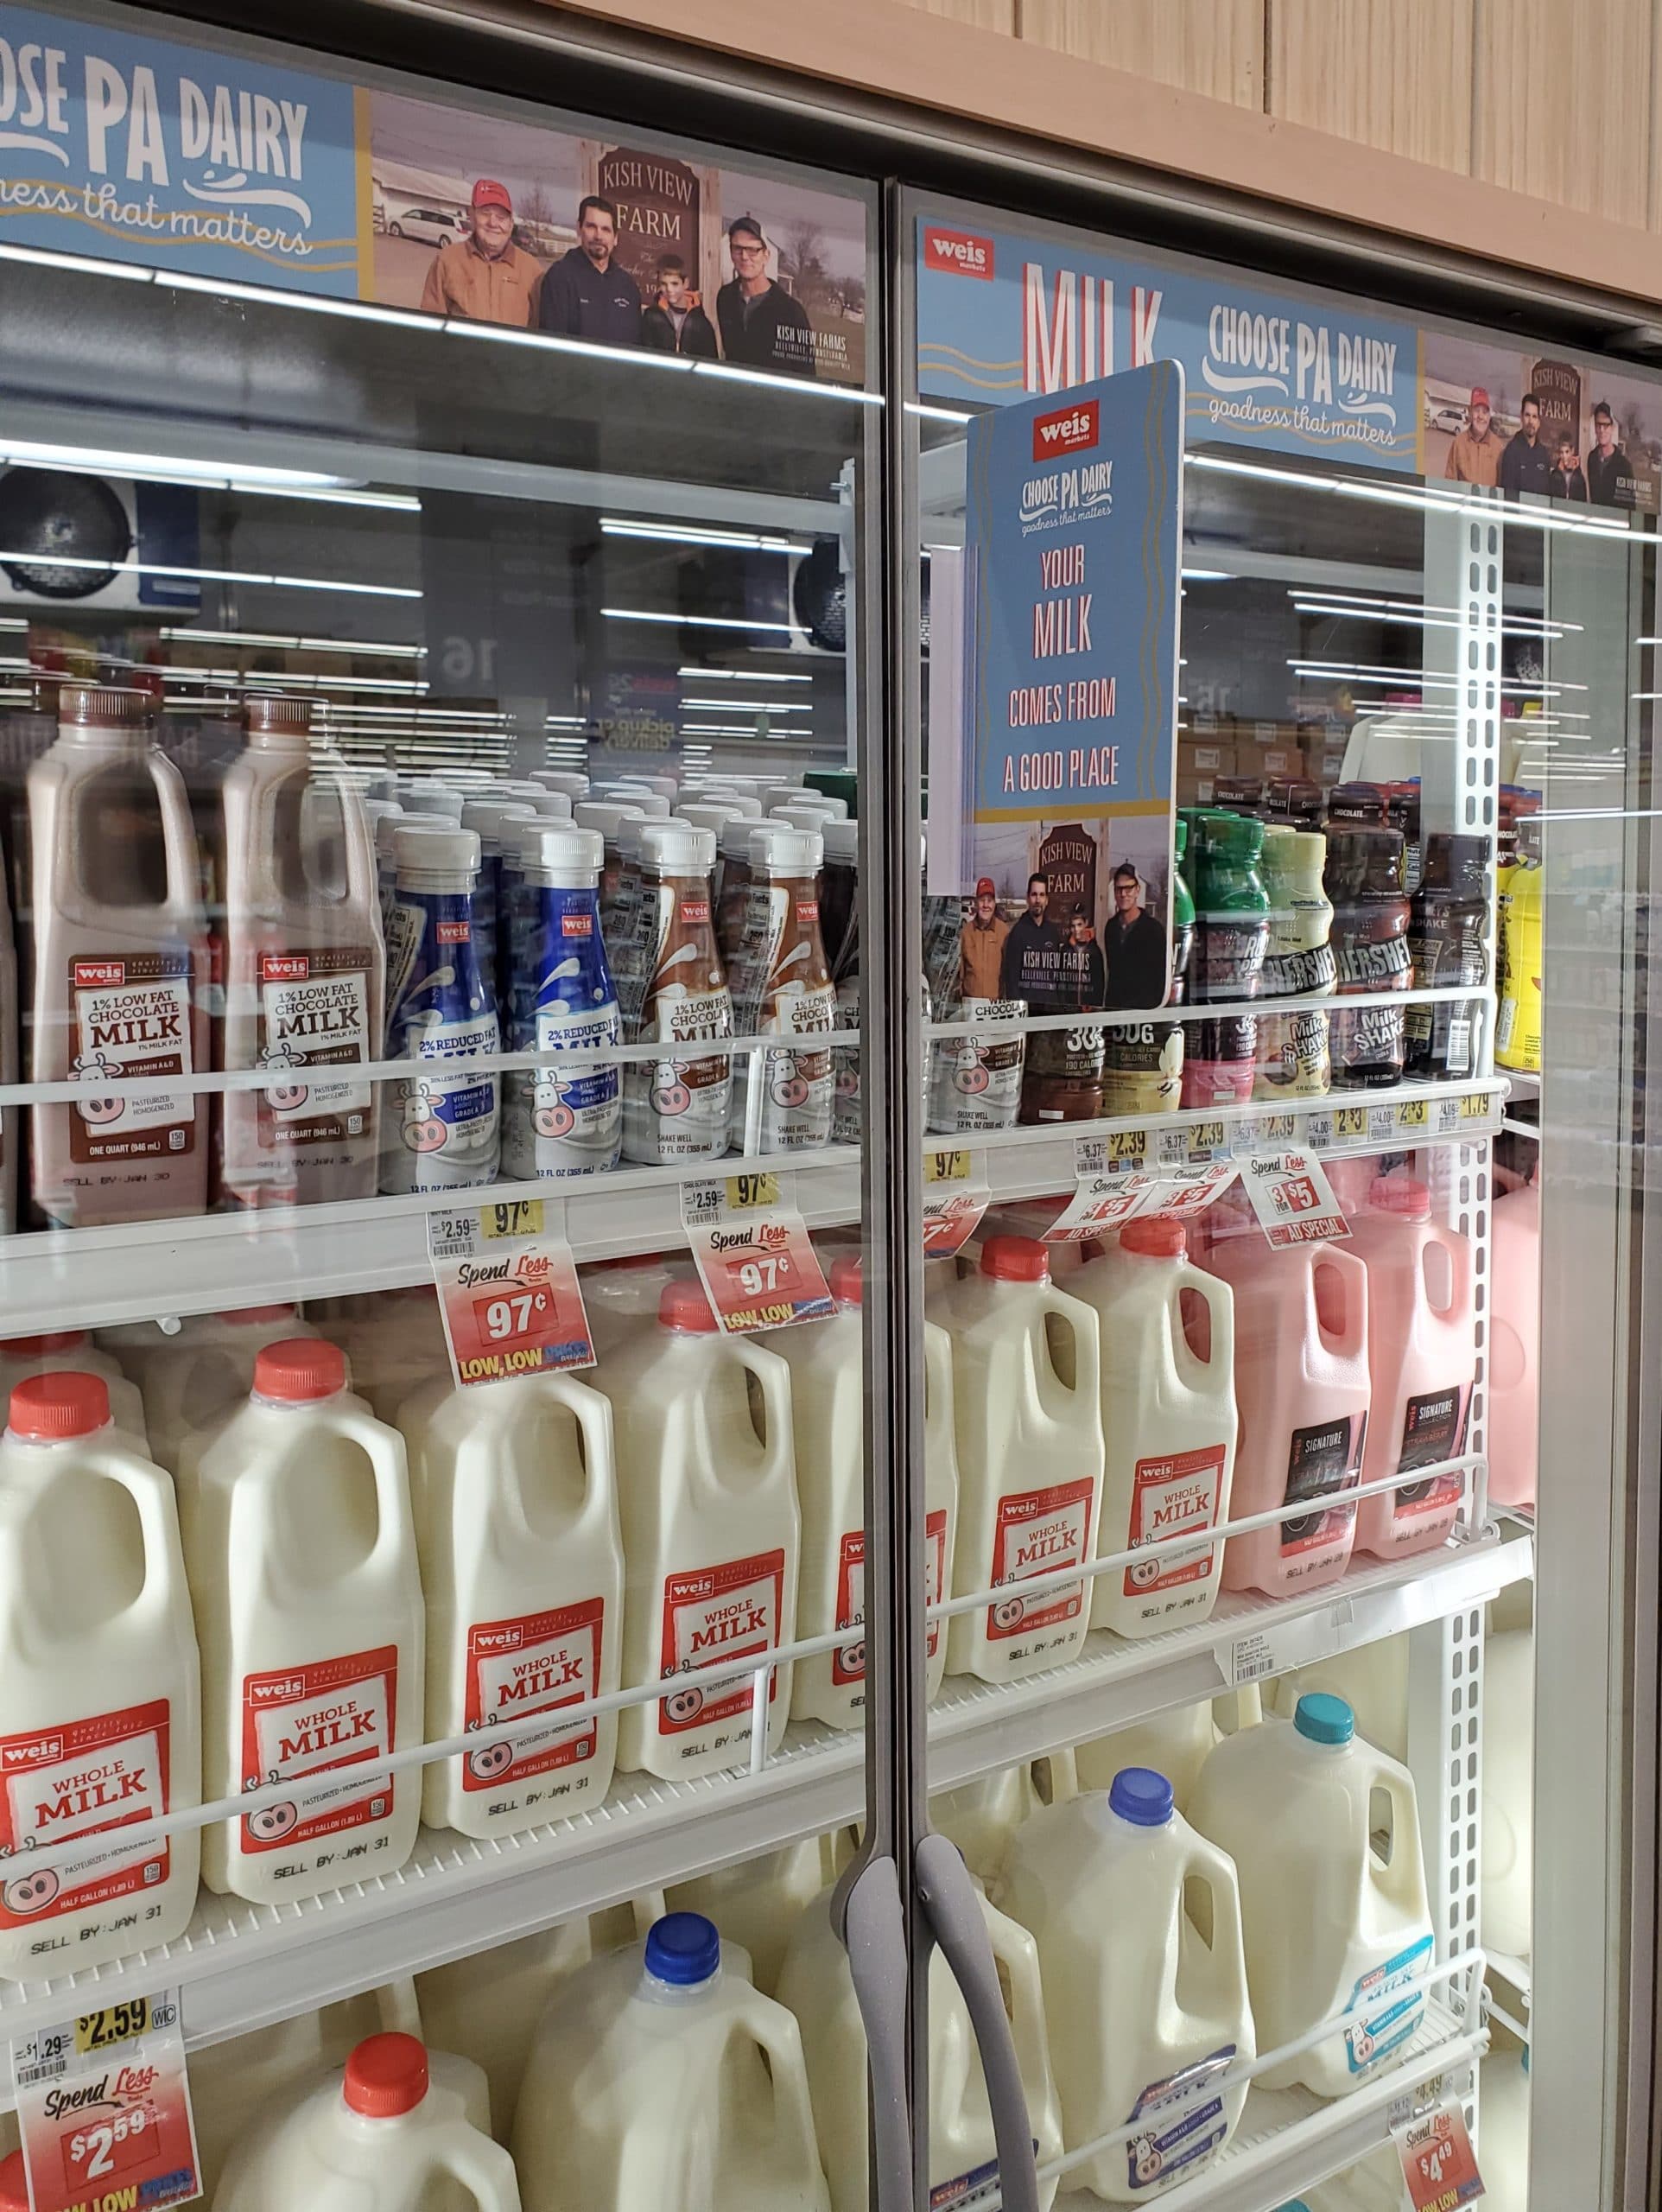 New Weis Store Features Pennsylvania Dairy Farmers in the Dairy Case to Connect with Consumers